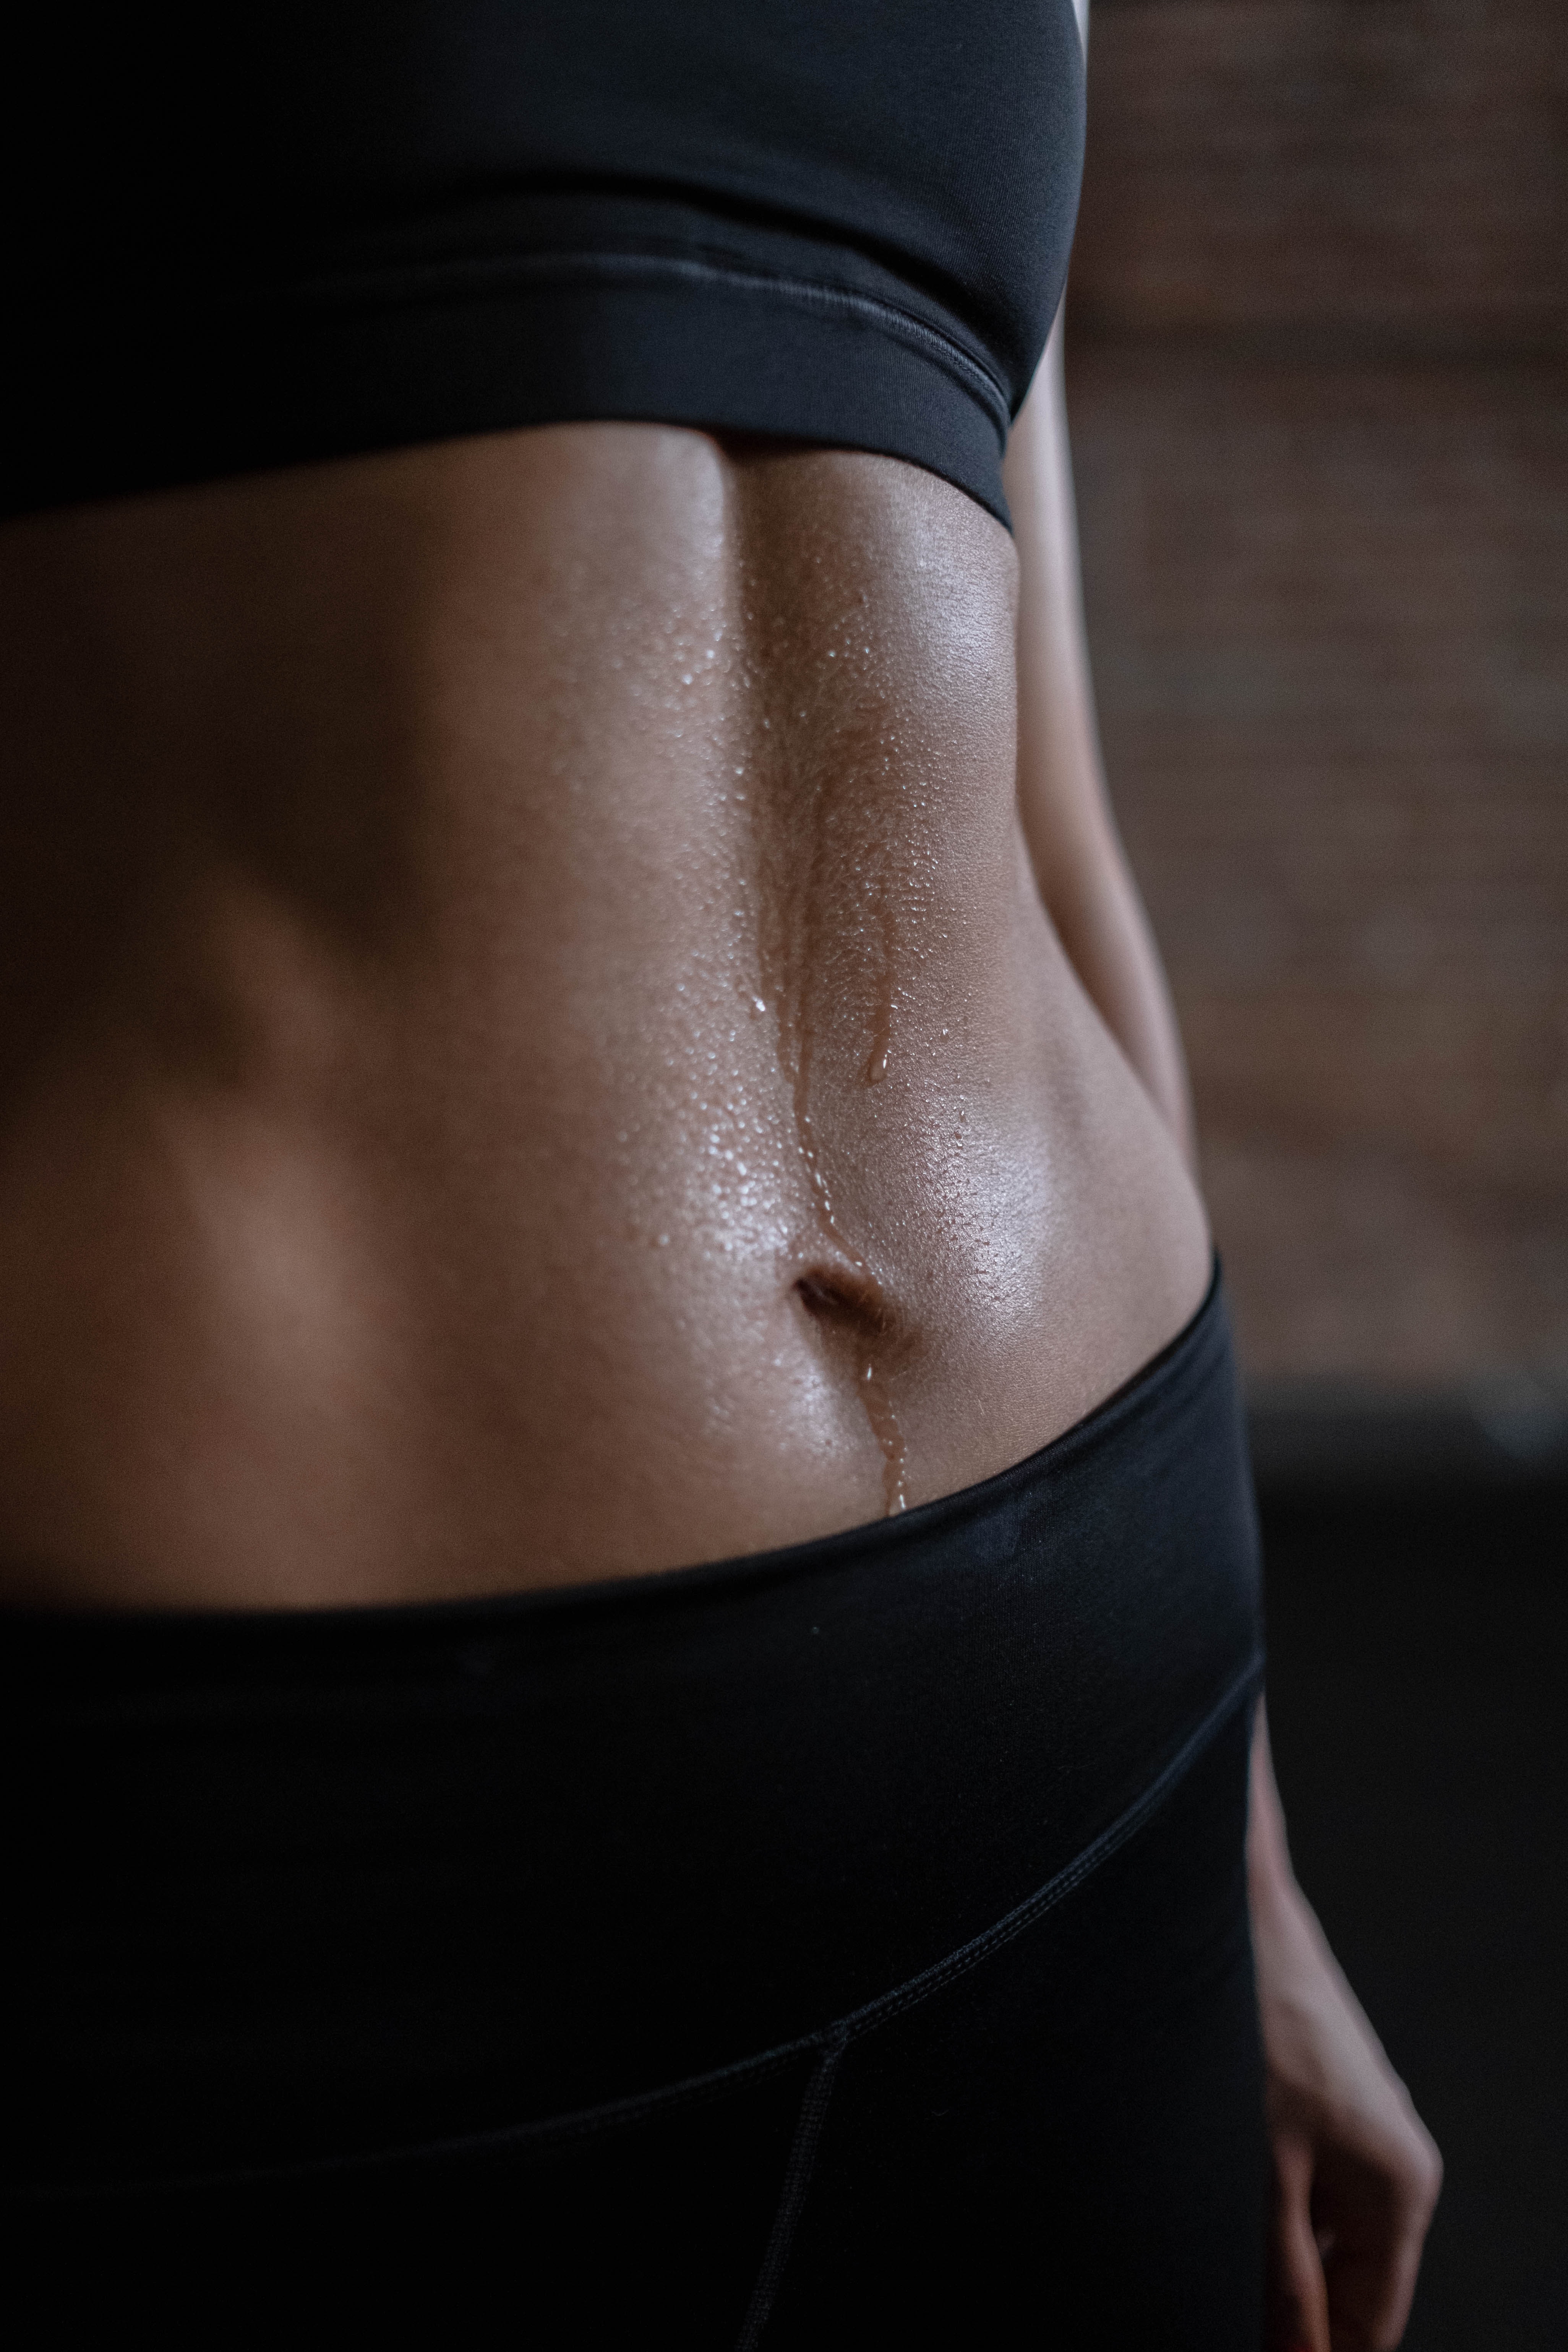 Woman's abs